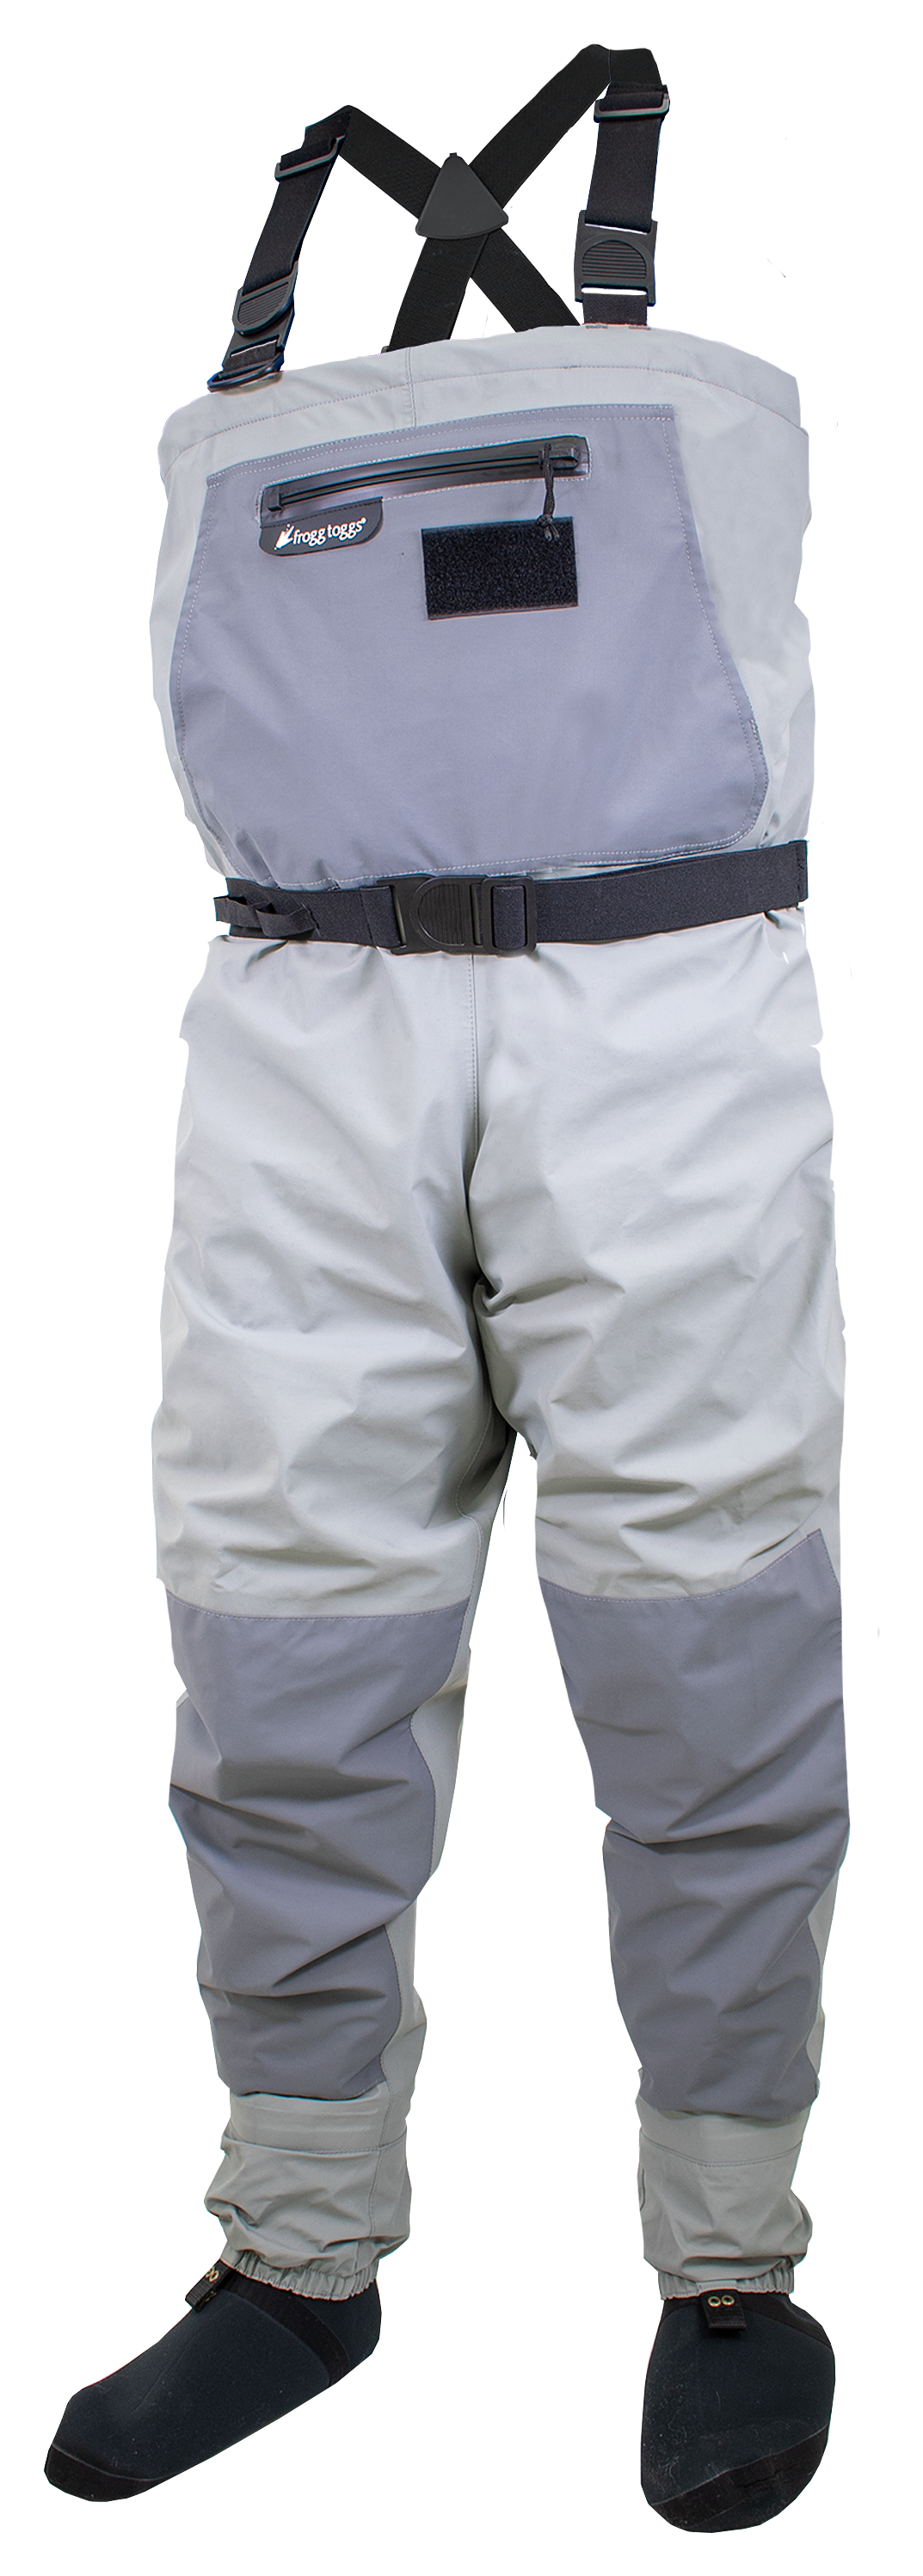 Frogg Toggs Hellbender Pro Stockingfoot Chest Waders for Men